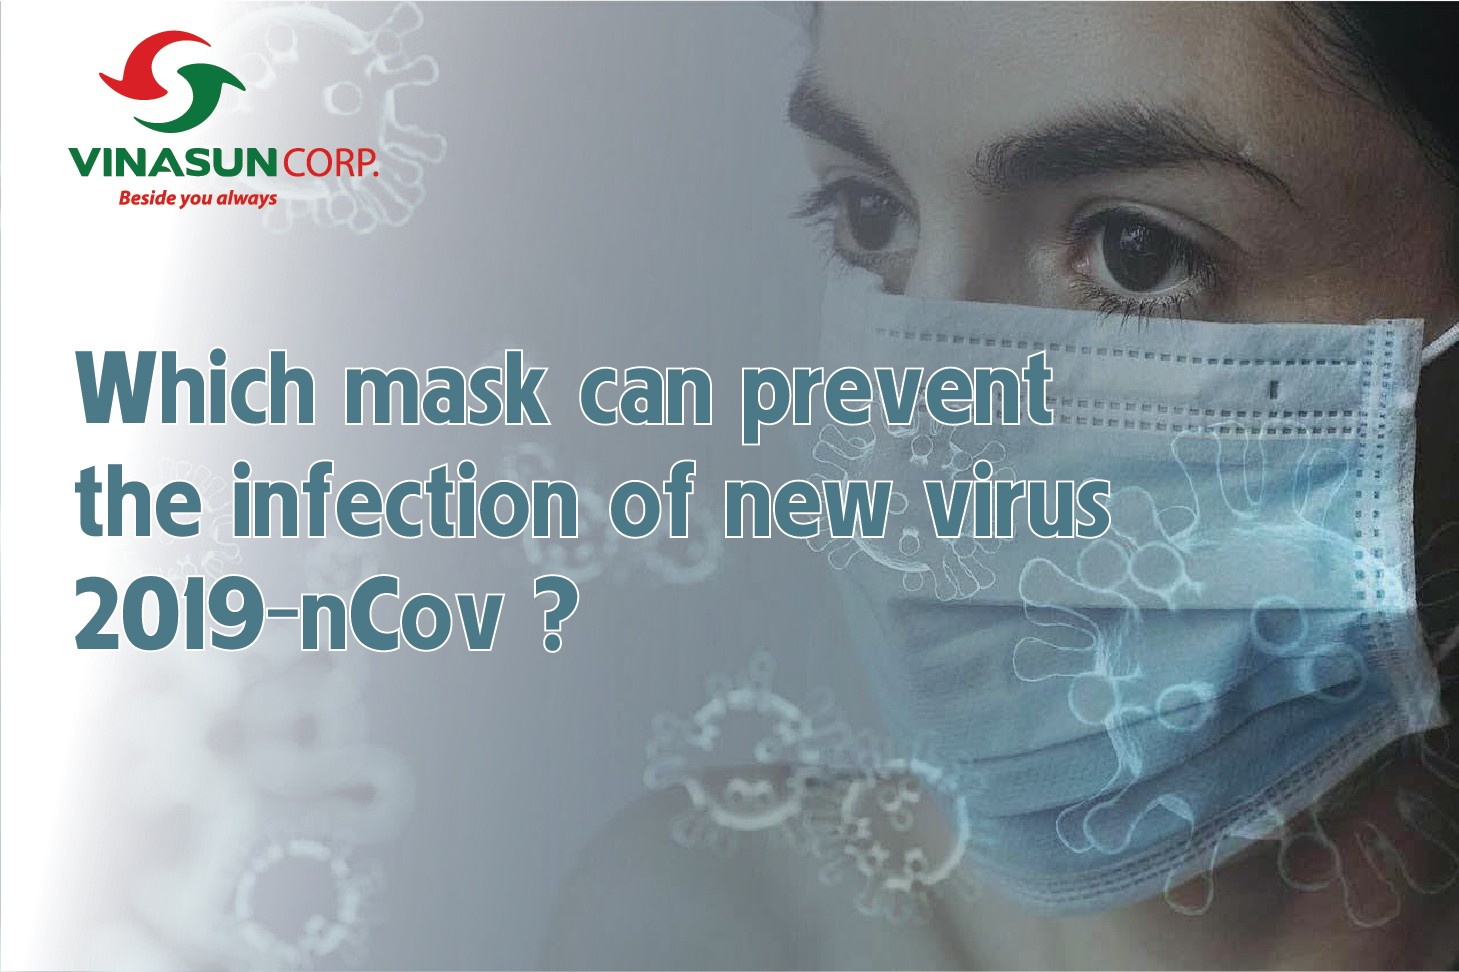 Instructions on how to wear a mask properly, limit nCoV outbreak